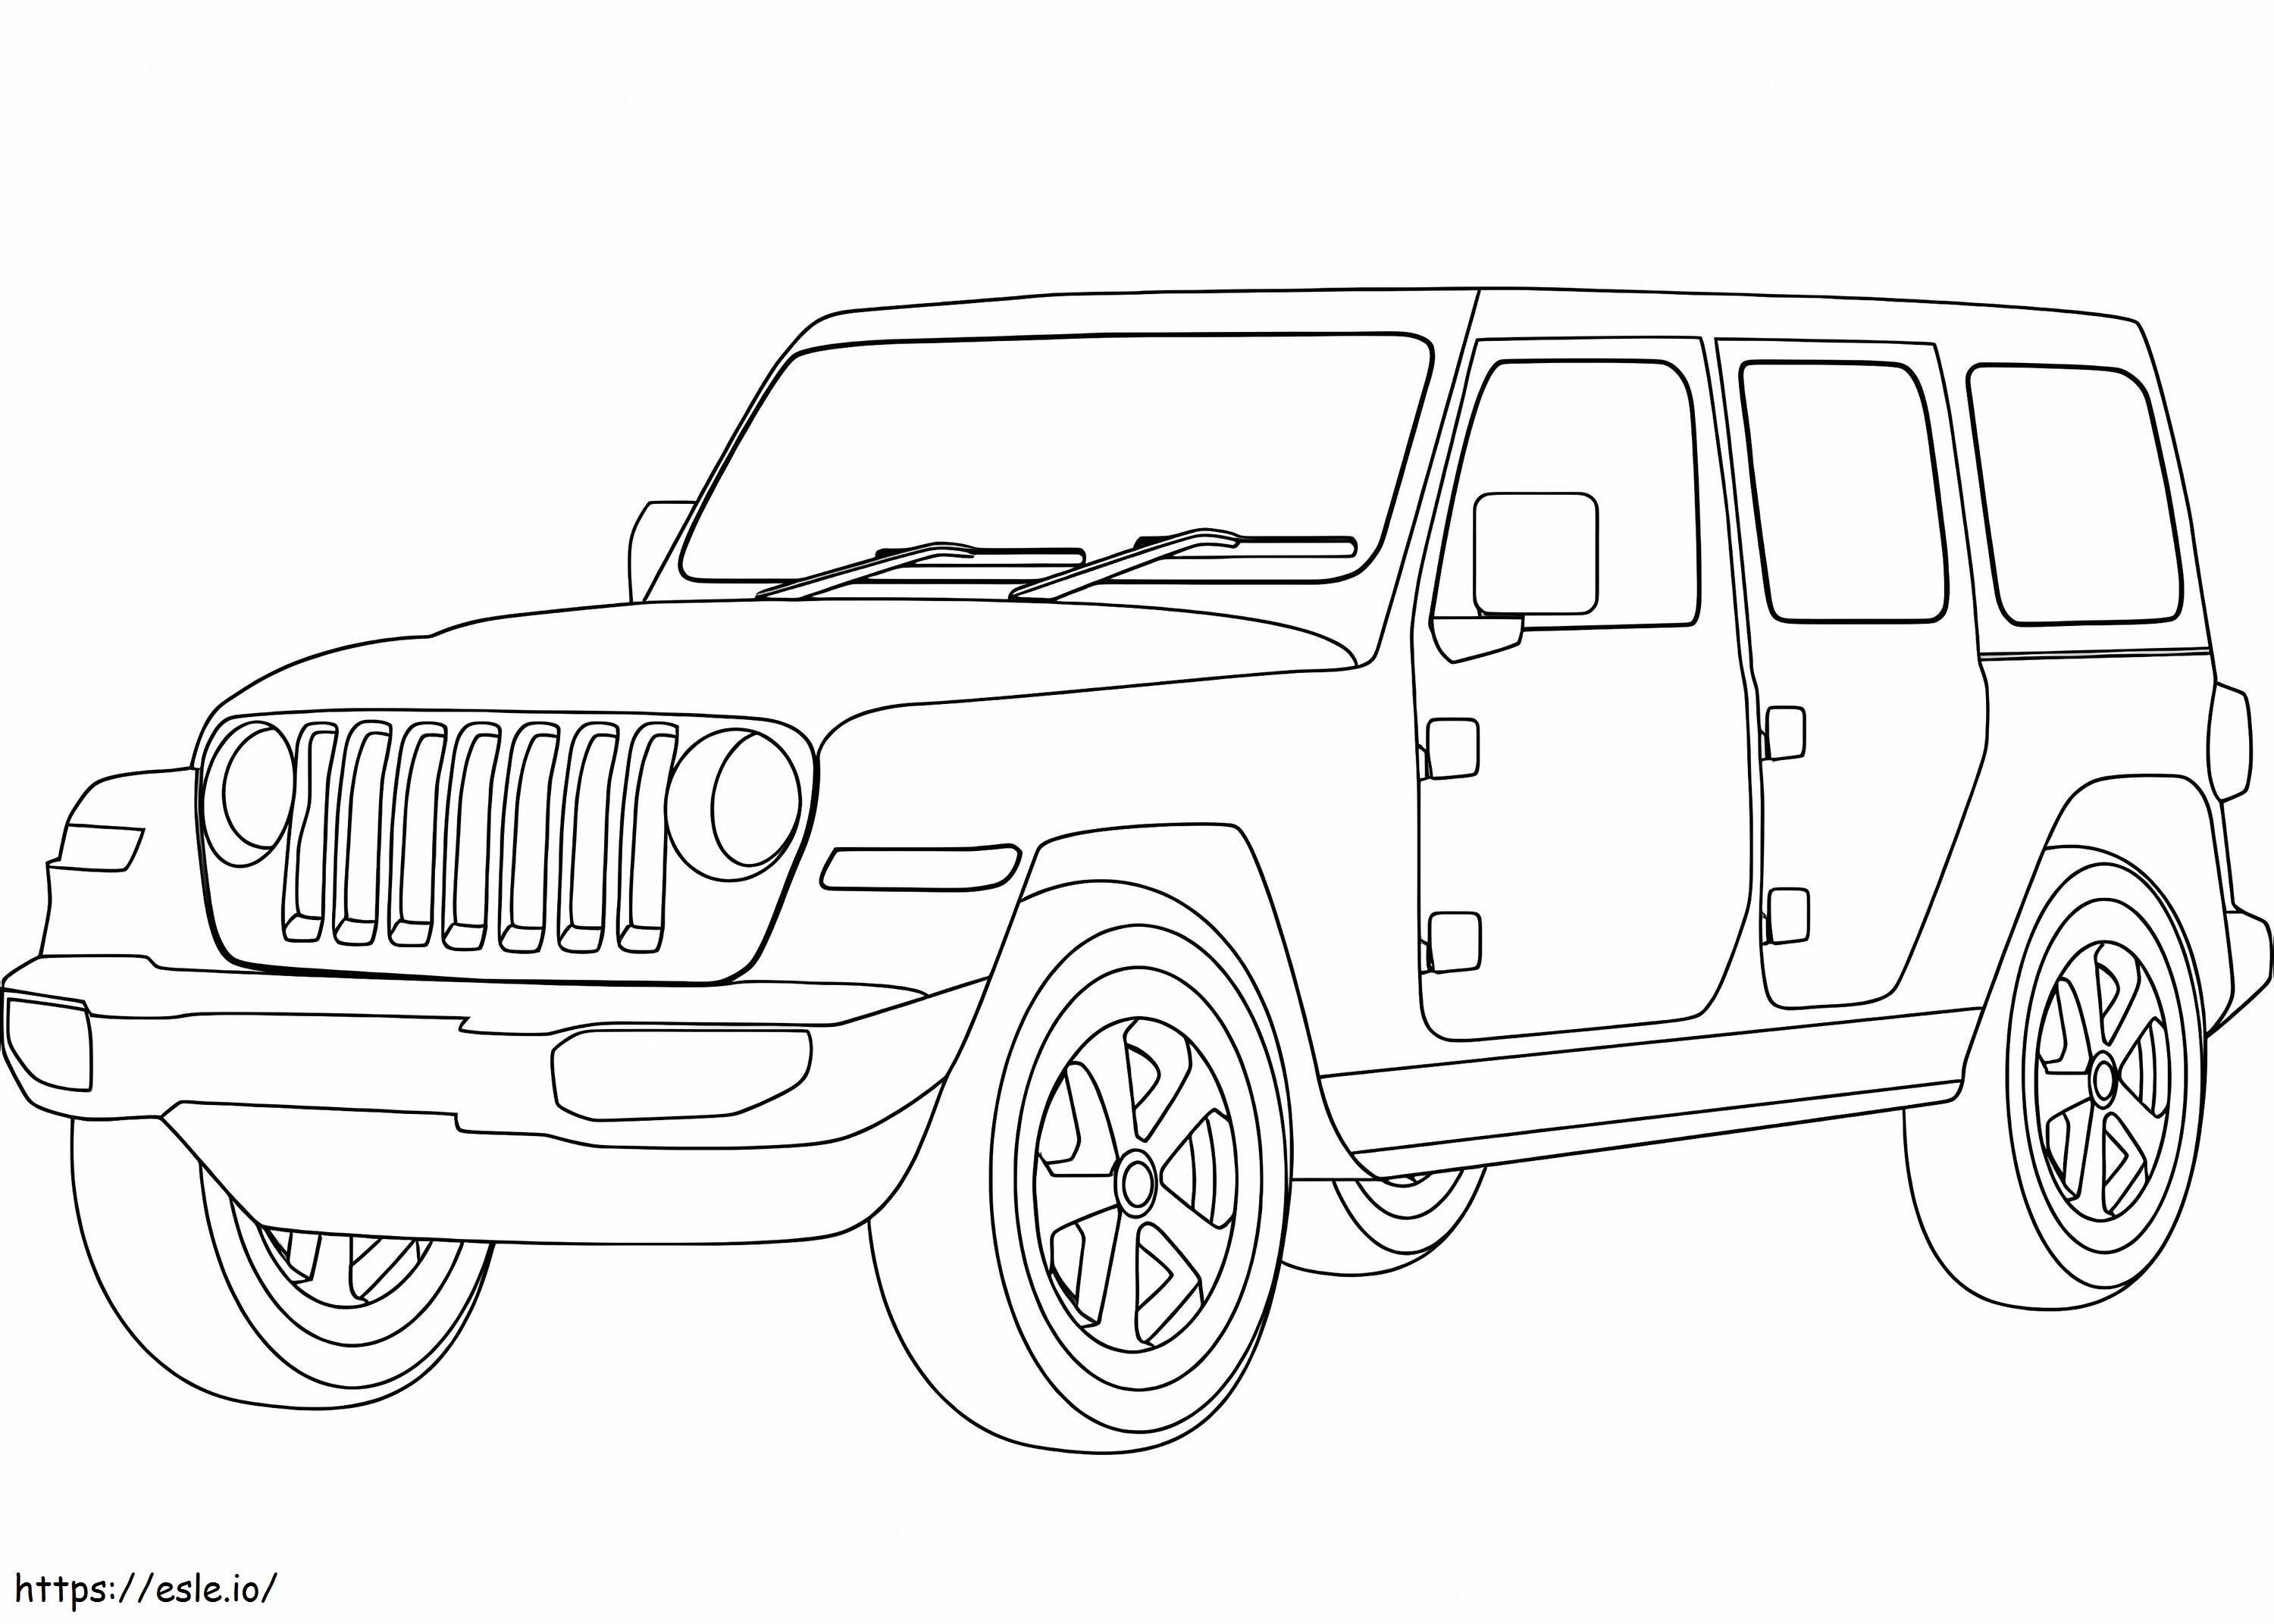 Jeep Wrangler coloring page